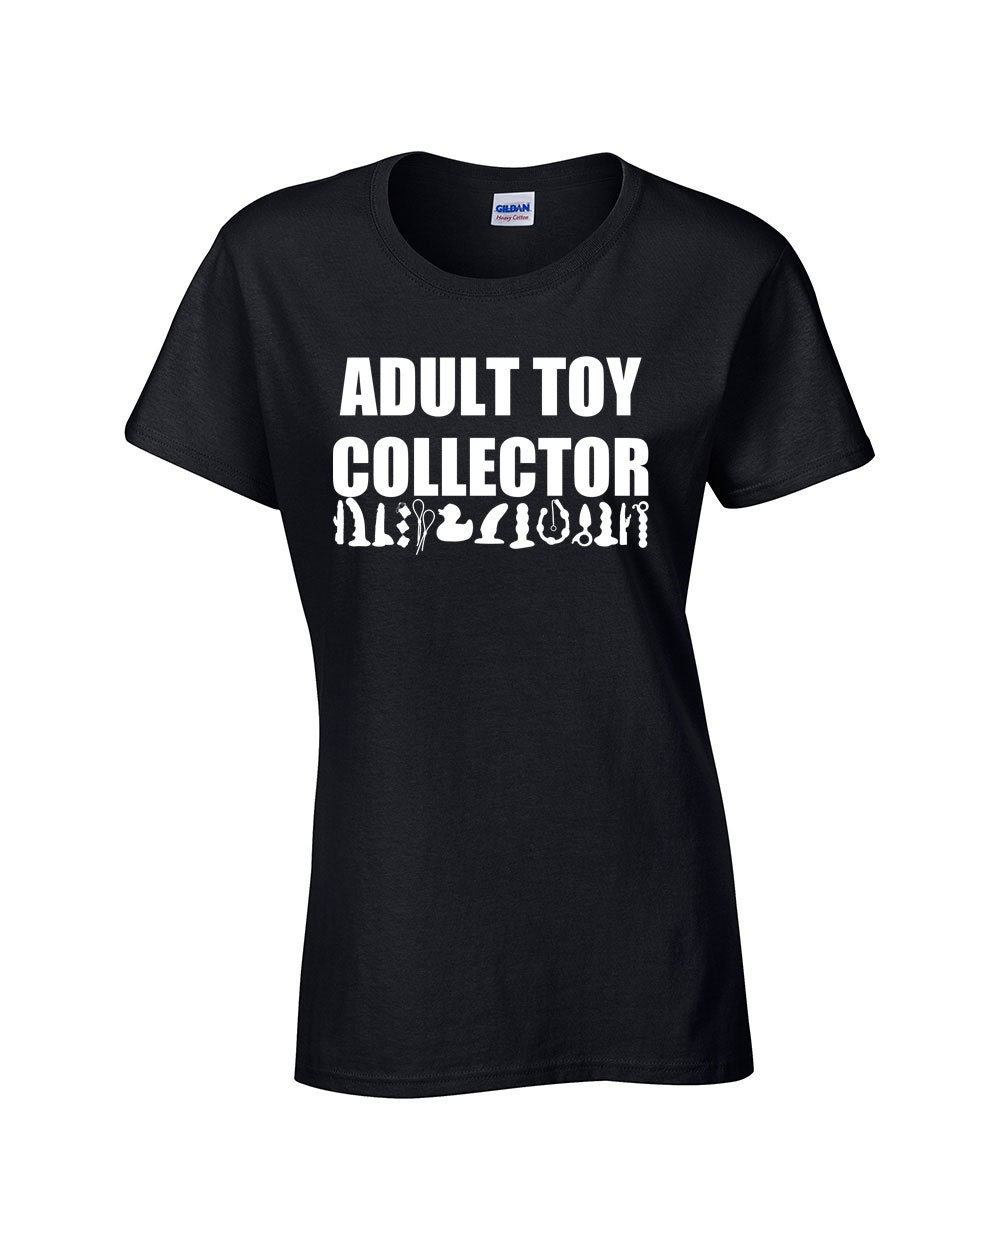 Adult Toy Collector T Shirt Funny Offensive Sex Toy By Belownormal